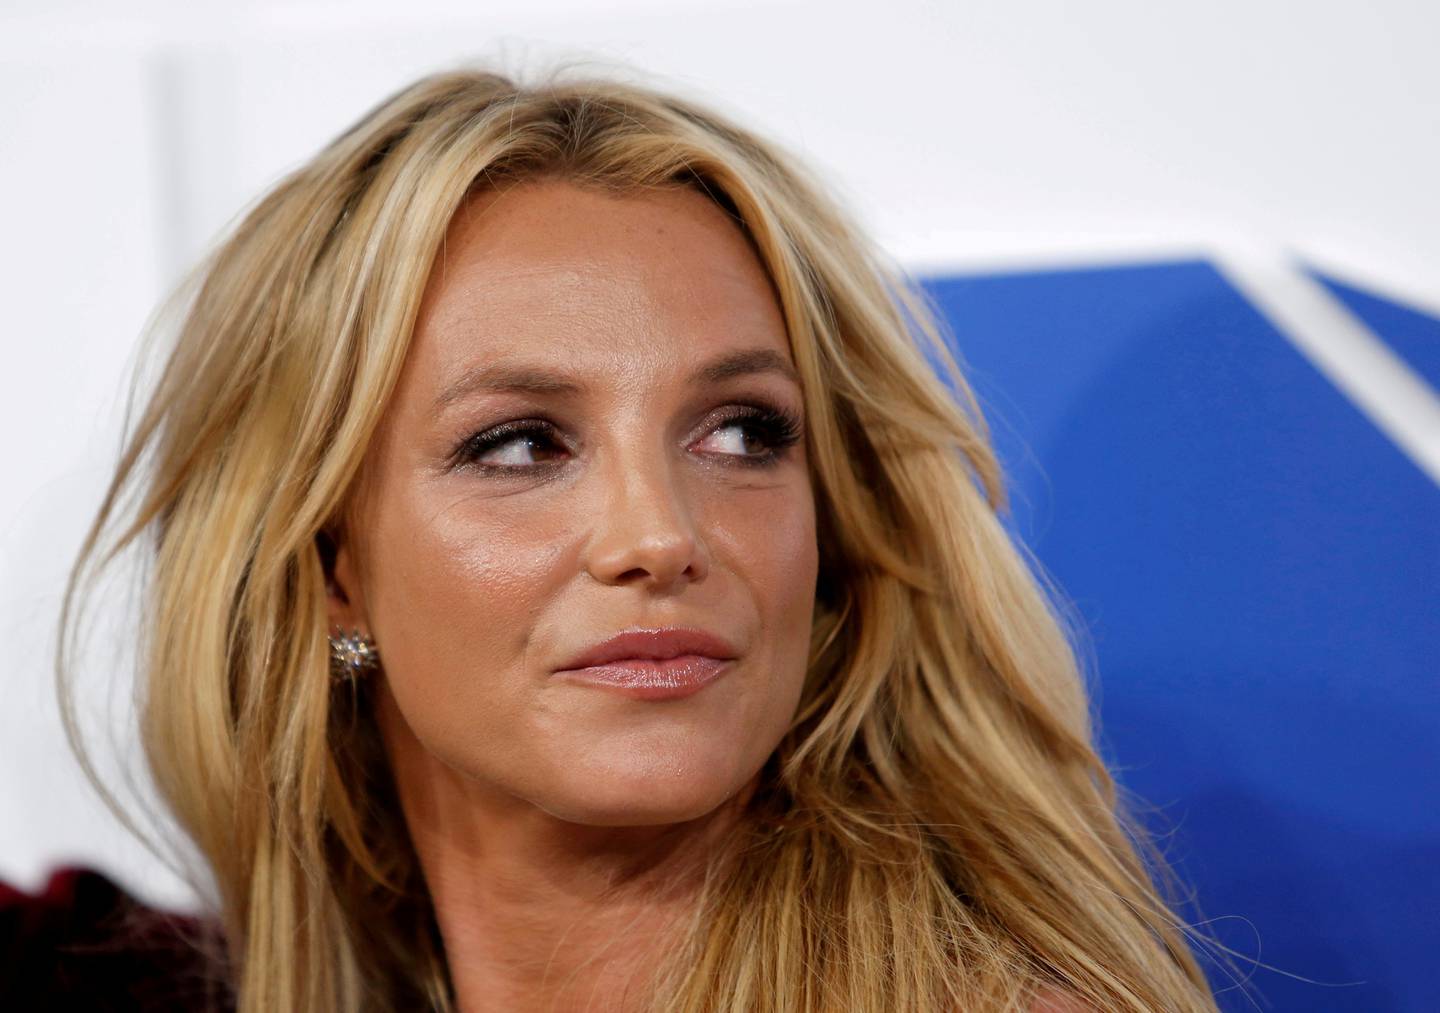 Britney Spears's experience with mental health issues has been covered widely by the global media. Reuters